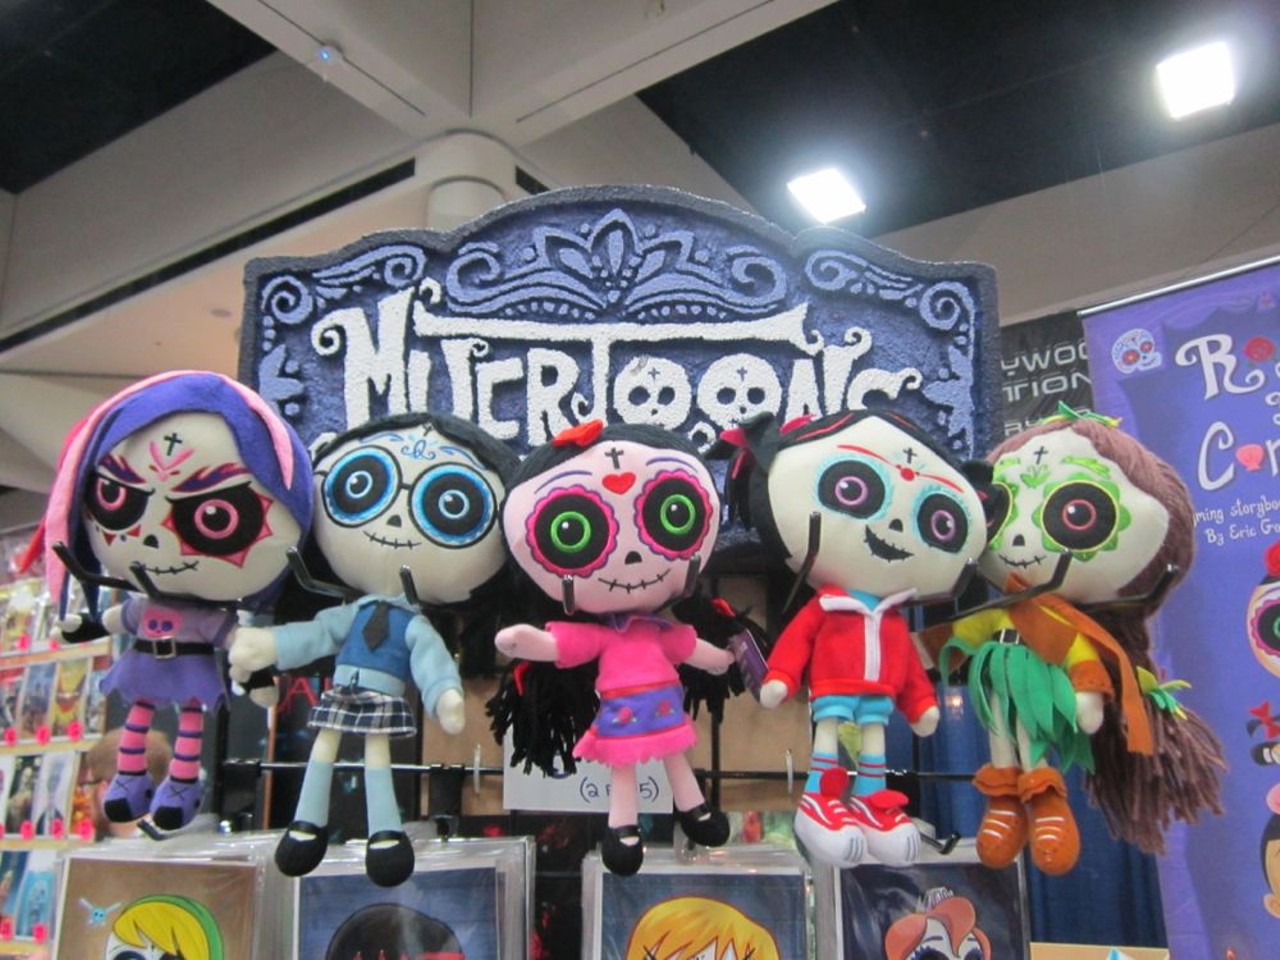 San Diego Comic-Con: Inside the Convention Center